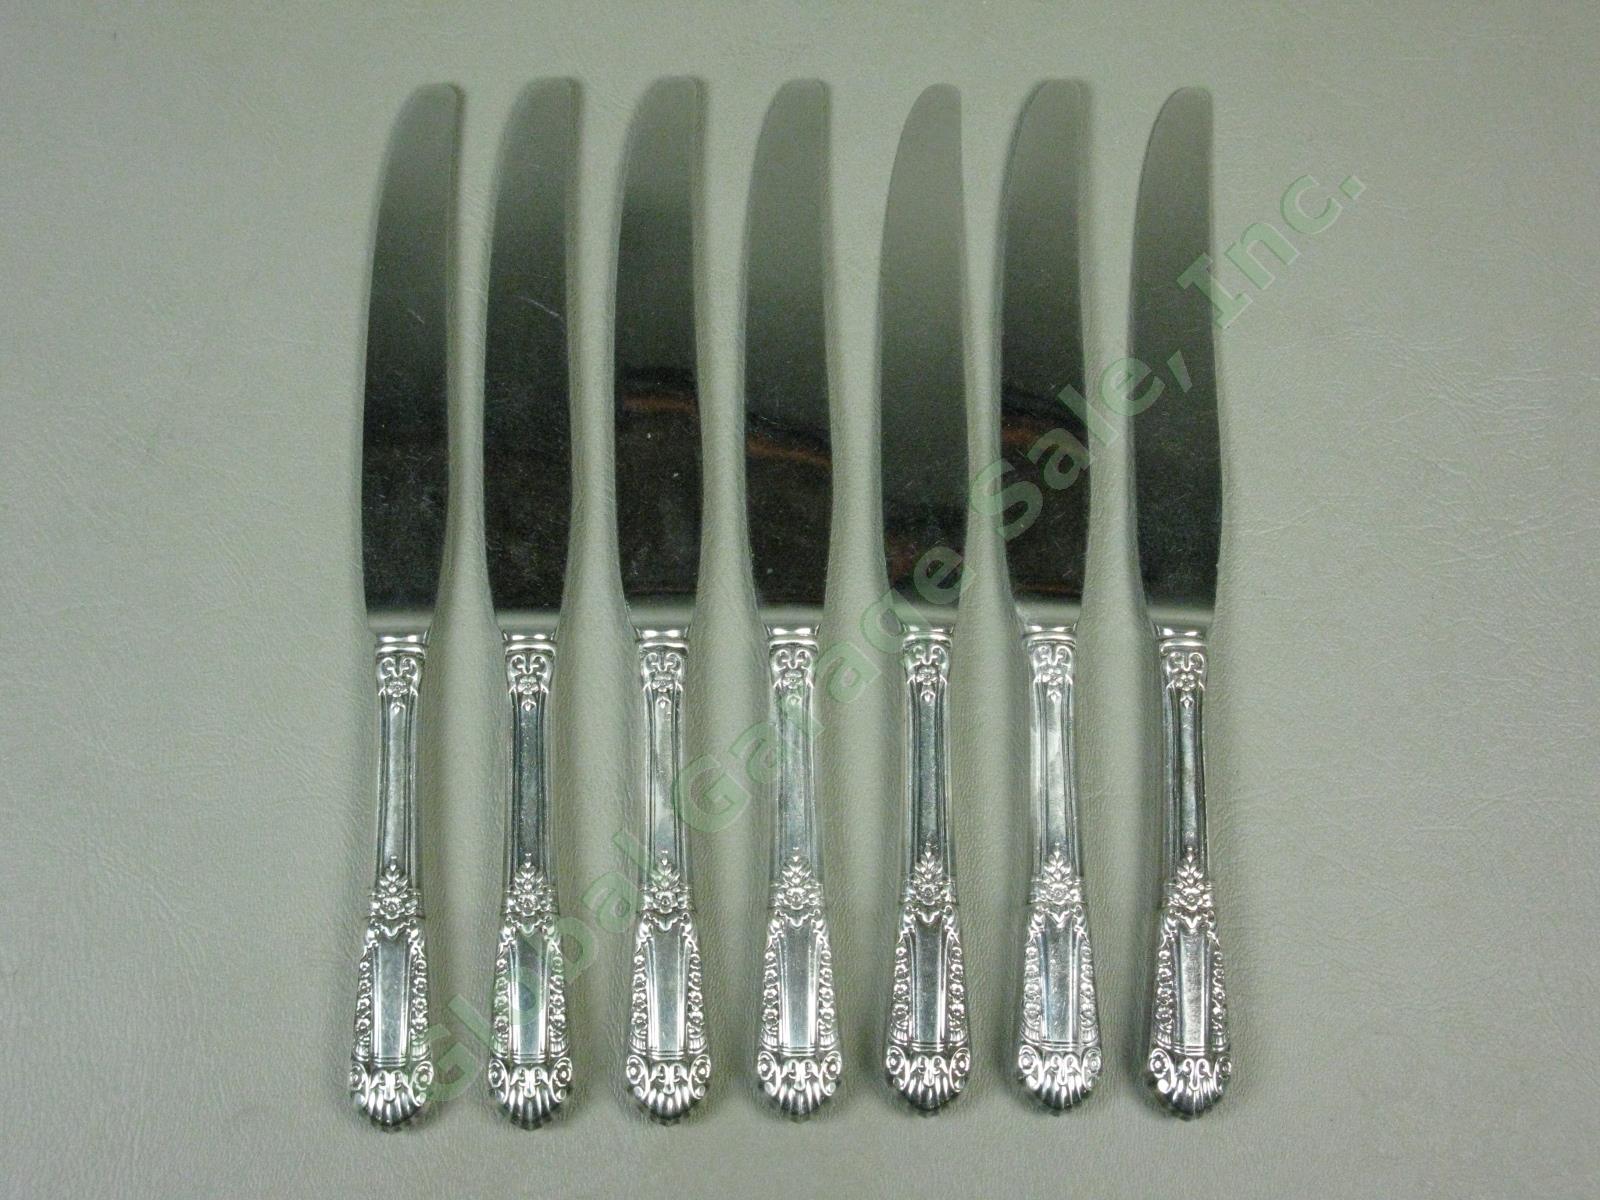 7 State House Inaugural Sterling Silver Dinner Knives Silverware Flatware Set NR